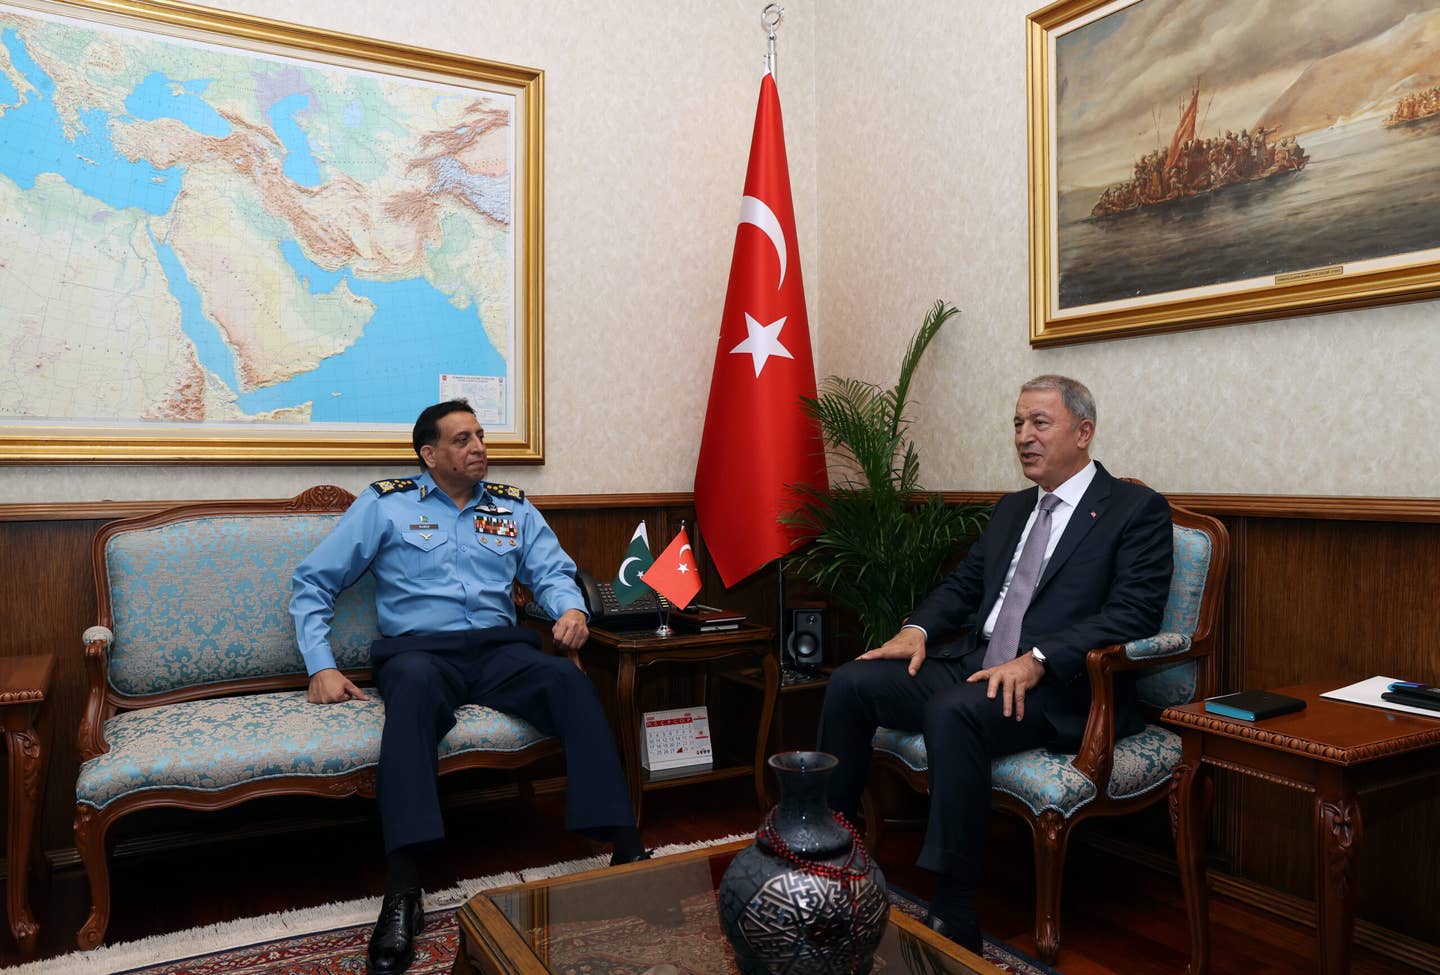 Turkish Minister of Defense Hulusi Akar (right) and Pakistan Air Force chief ACM Zaheer Sidhu (left) pose for a photo during a meeting in Ankara, Turkiye on October 1, 2022. <em>Photo by Arif Akdogan/Anadolu Agency via Getty Images</em>